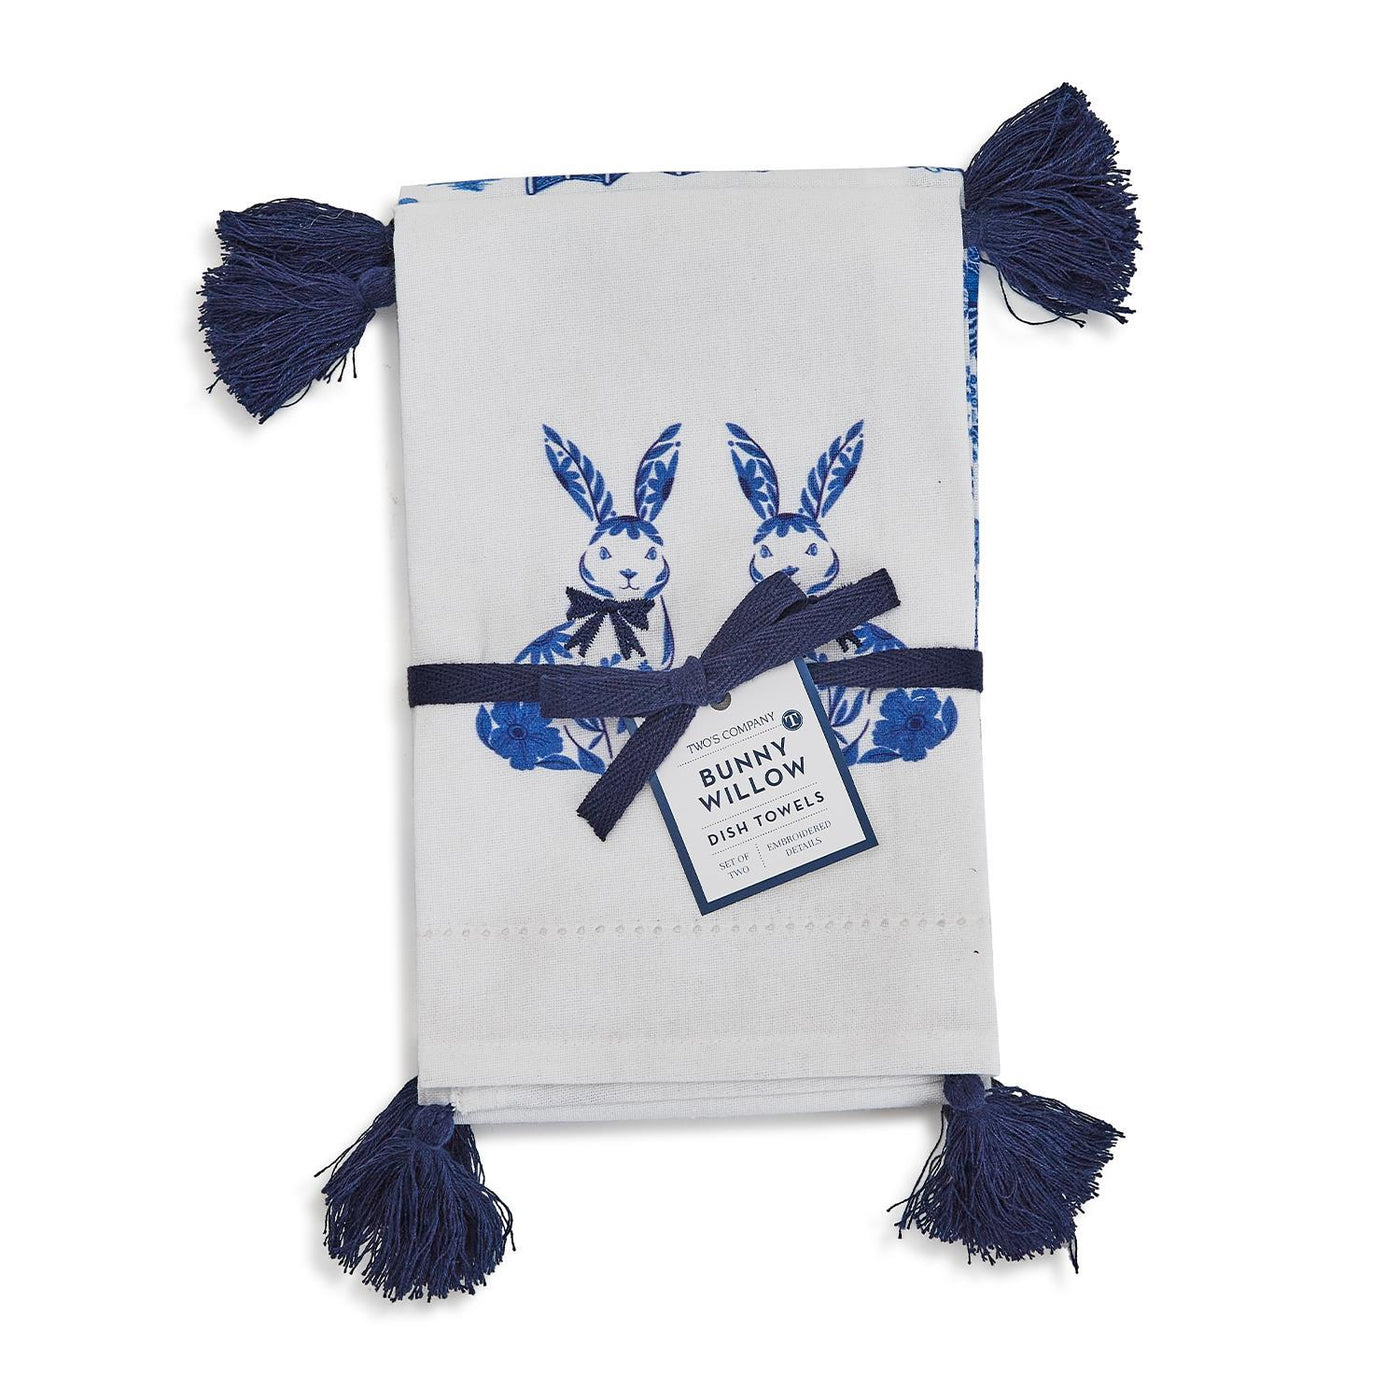 Blue & White Set of Two Dish Towels W/ Tassels & Embroidery